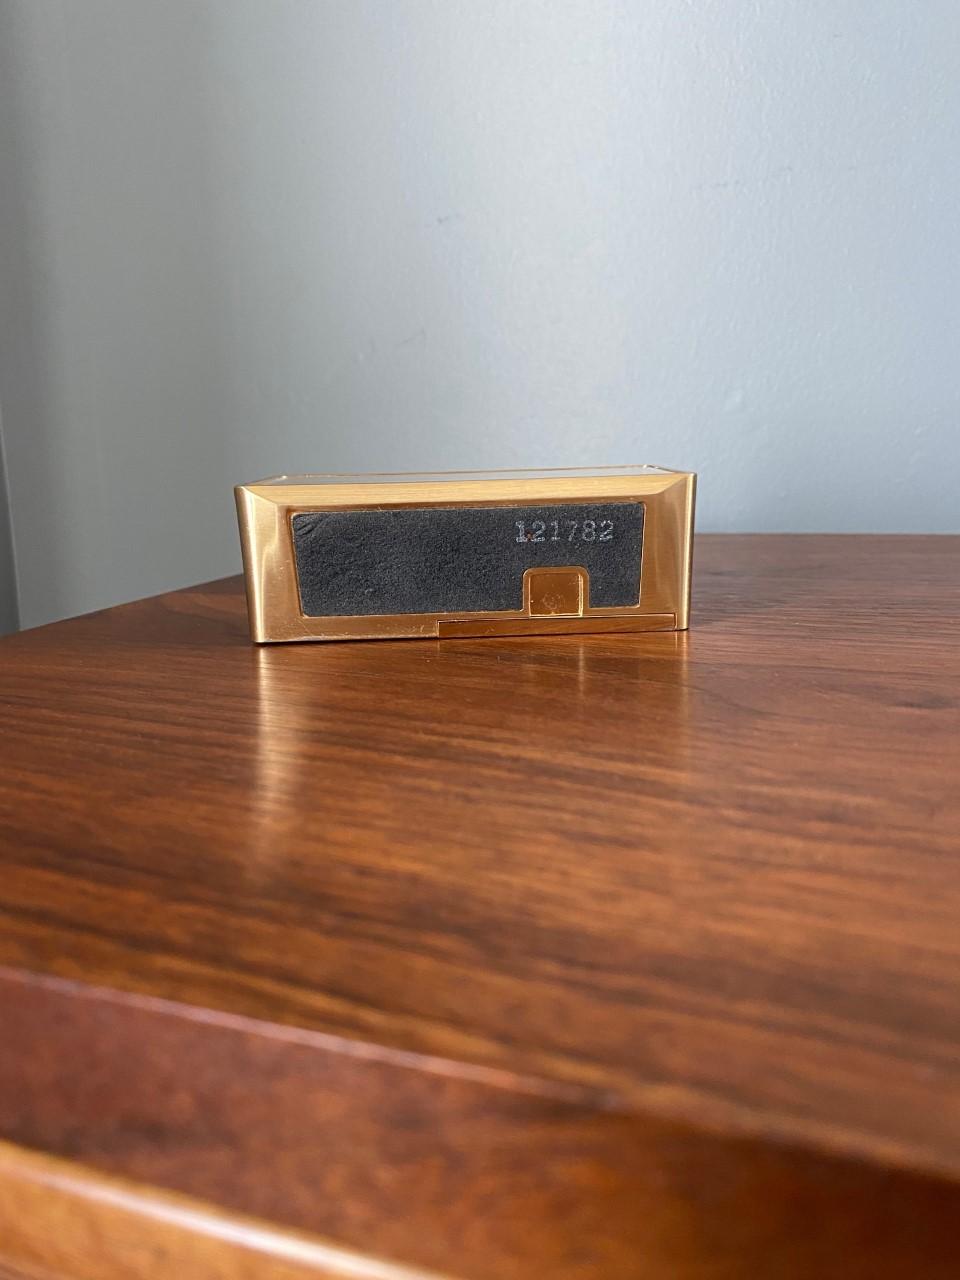 Incredible and attractive vintage Pierre Cardin alarm clock. This piece in working condition is minimal and modern reflecting the visionary designer's principles of design. Covered in brass, this timepiece follows minimalist lines and signed by the